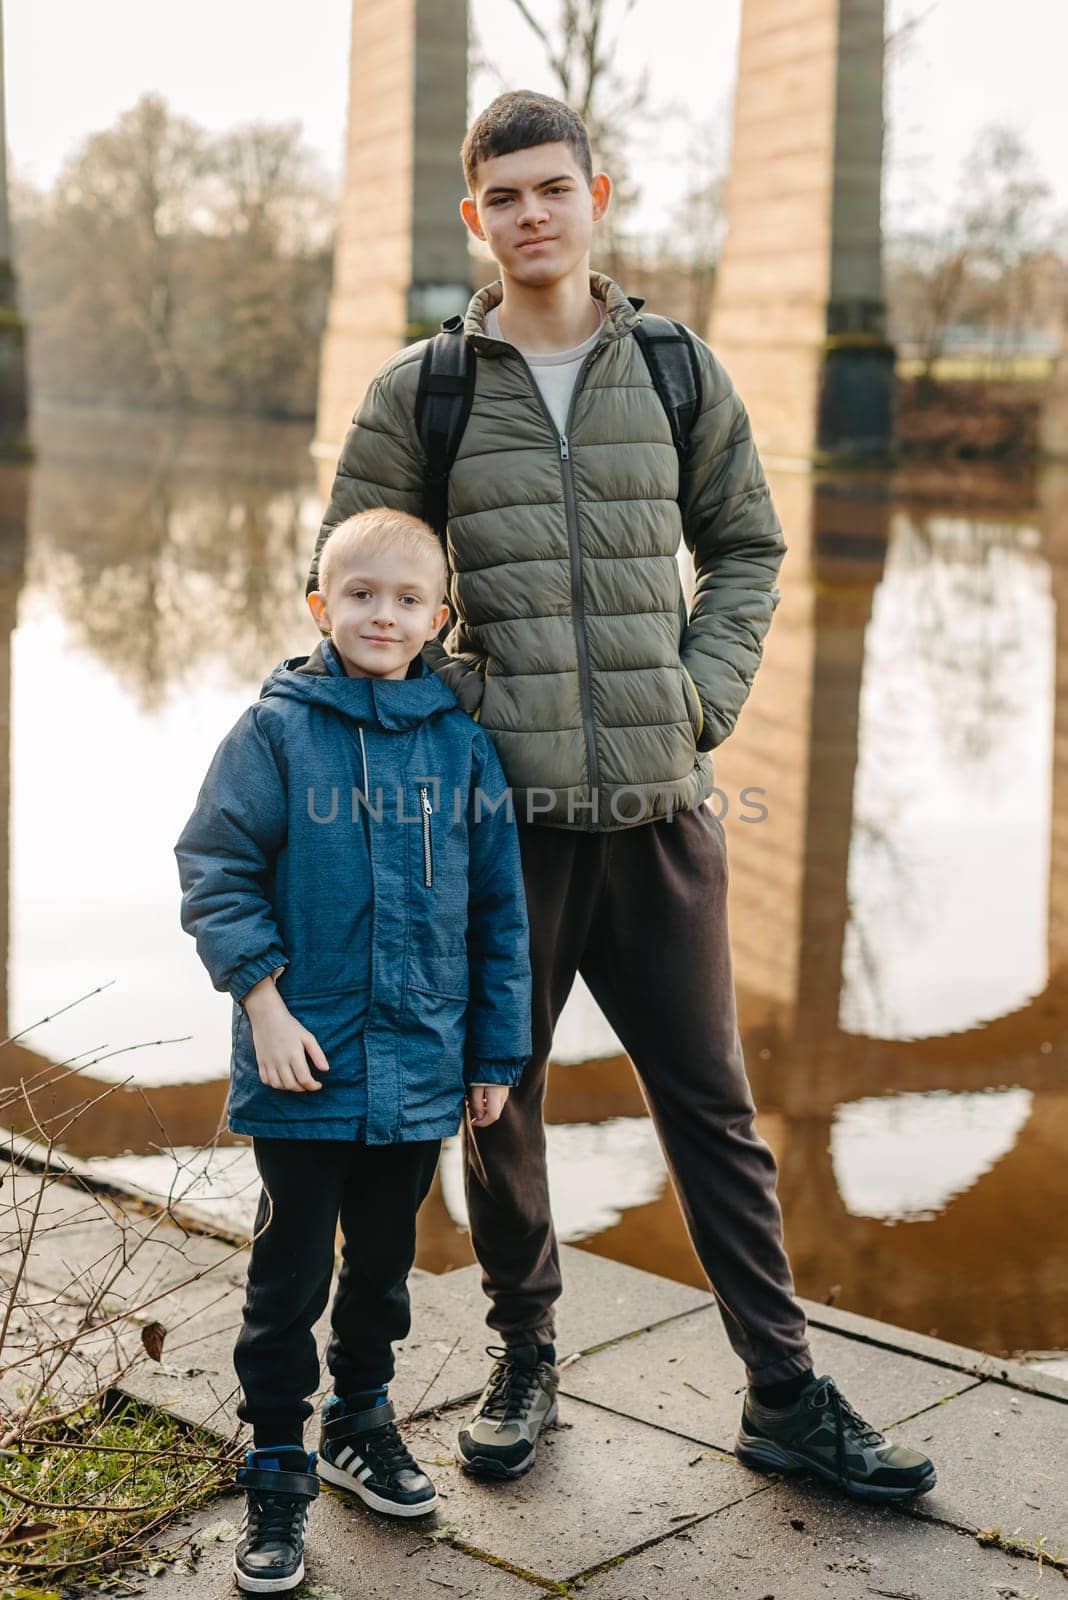 Winter Riverside Moment: Two Boys (8 and 17 Years Old) in Jackets Stand by the River and Bridge Piers, Autumn or Winter. by Andrii_Ko